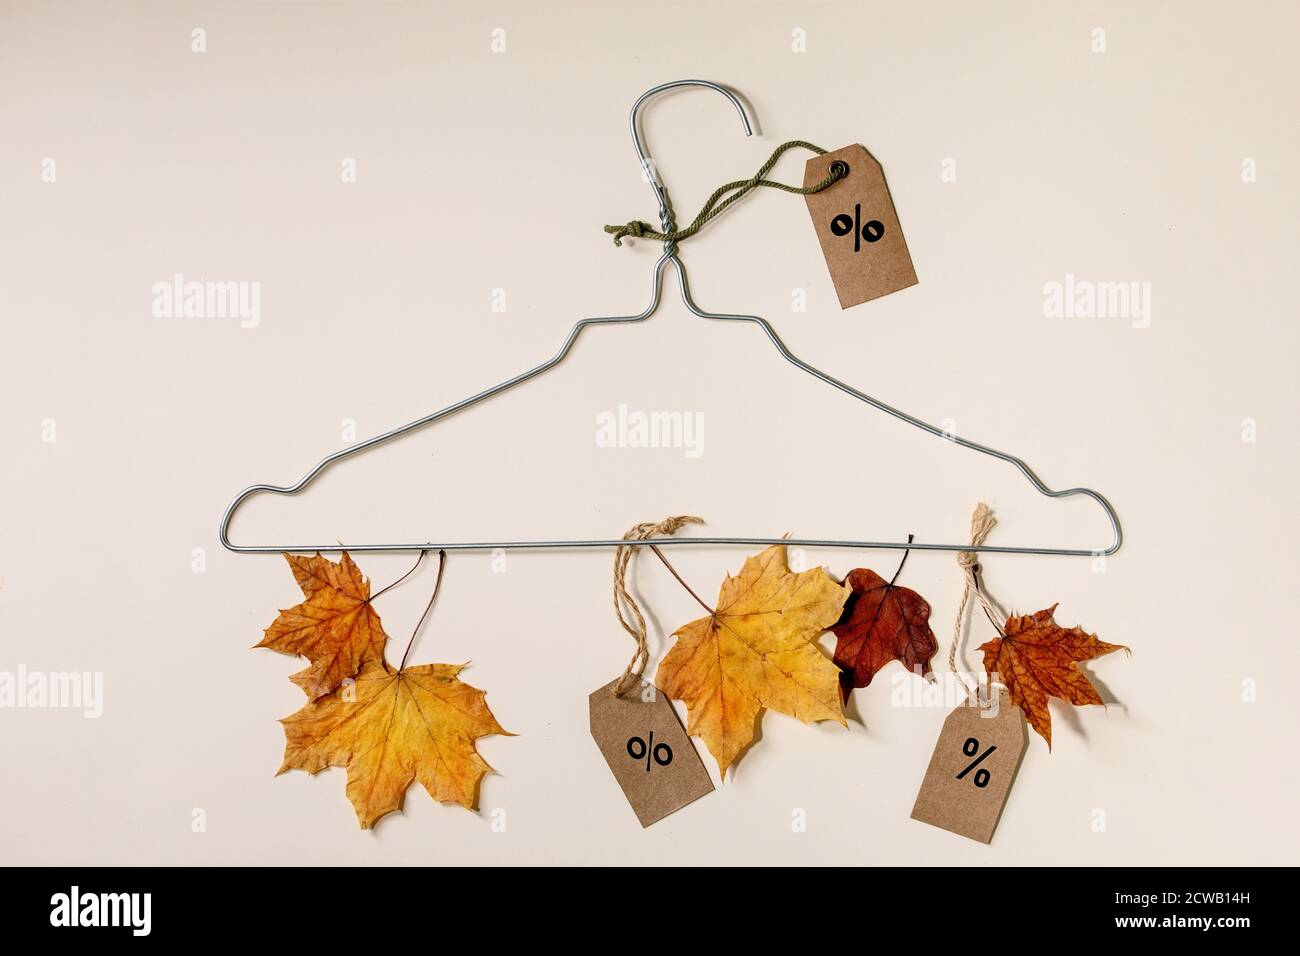 Autumn sale concept. Wire hanger, labels with percents, yellow autumn leaves over beige background. Flat lay. Stock Photo